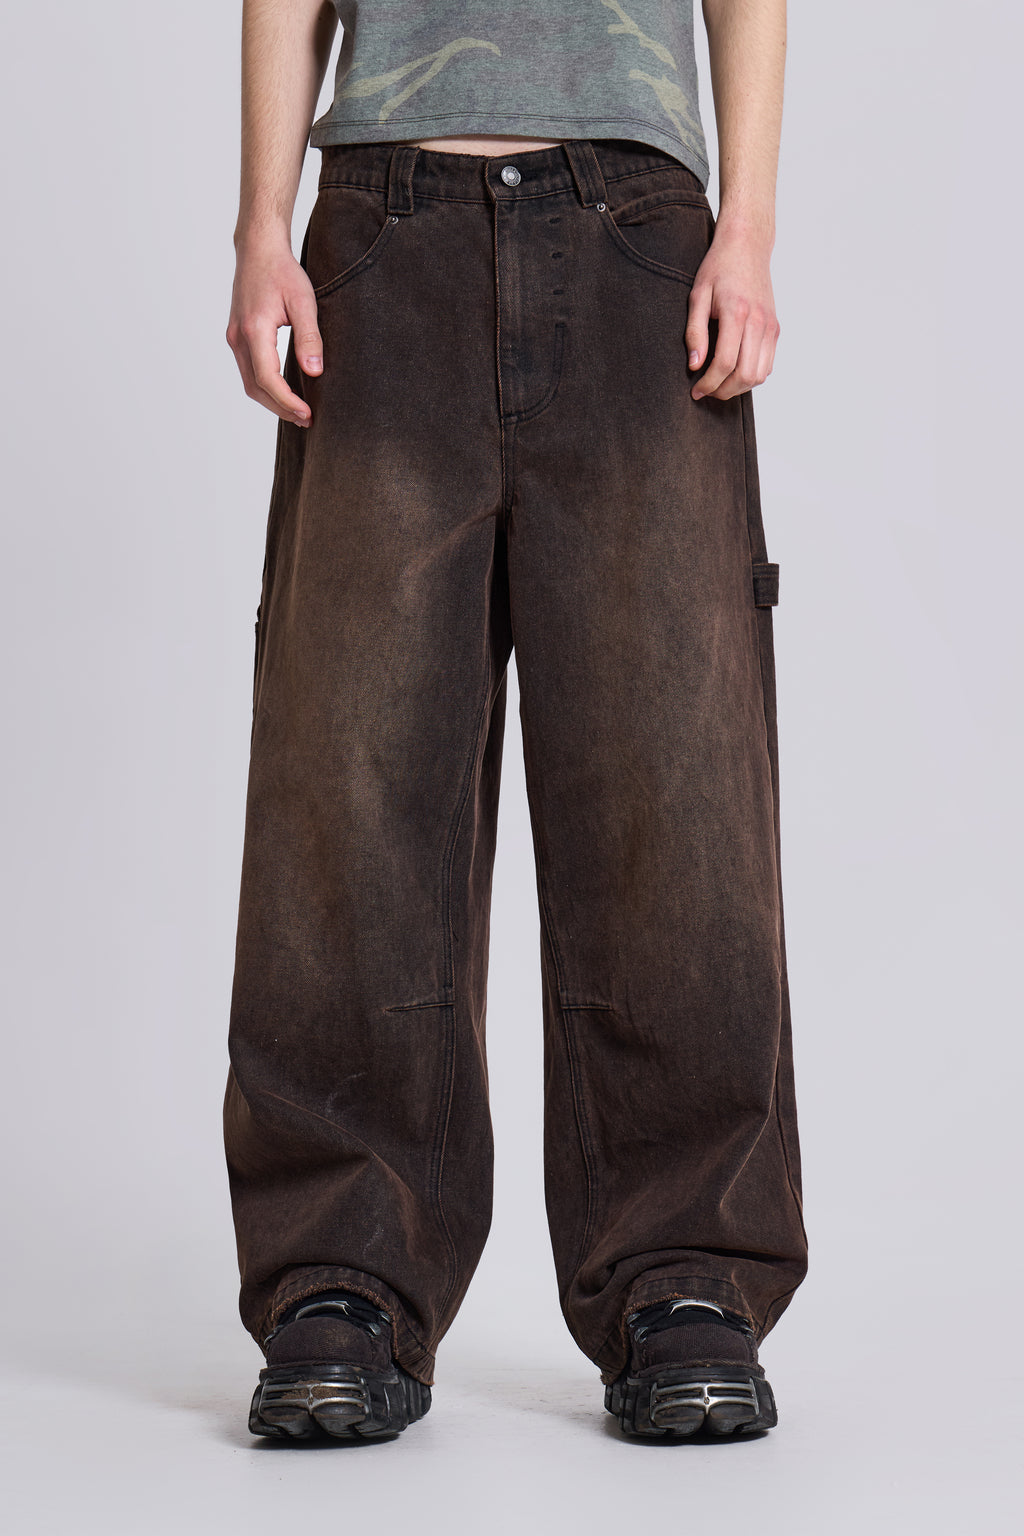 Brown Extreme Baggy Carpenter Jeans